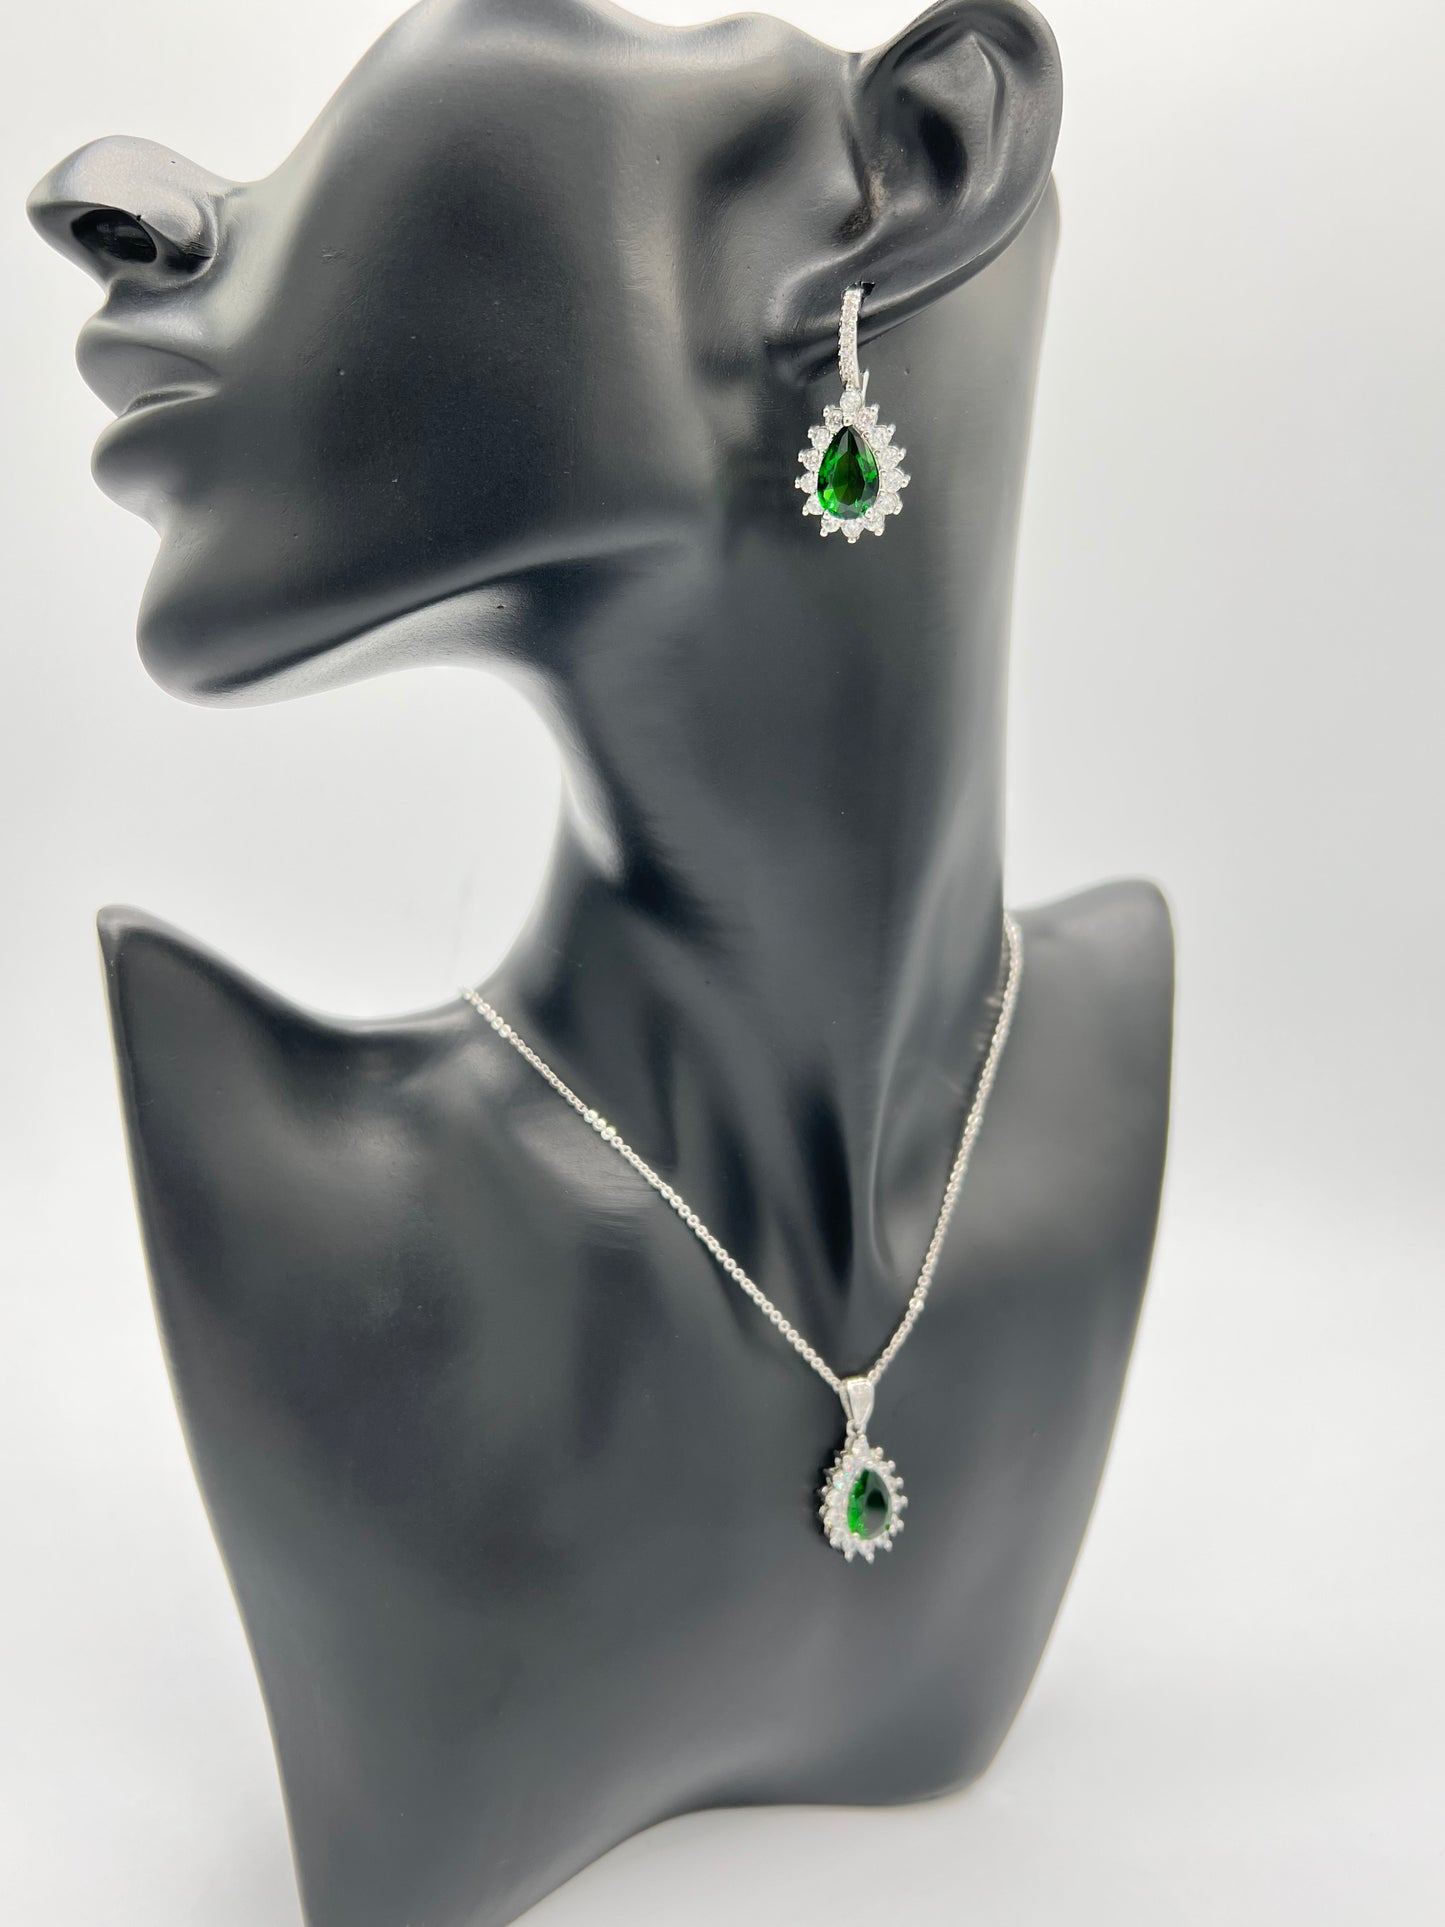 Tear Drop Shape Royal Design Earrings And Necklace Sets